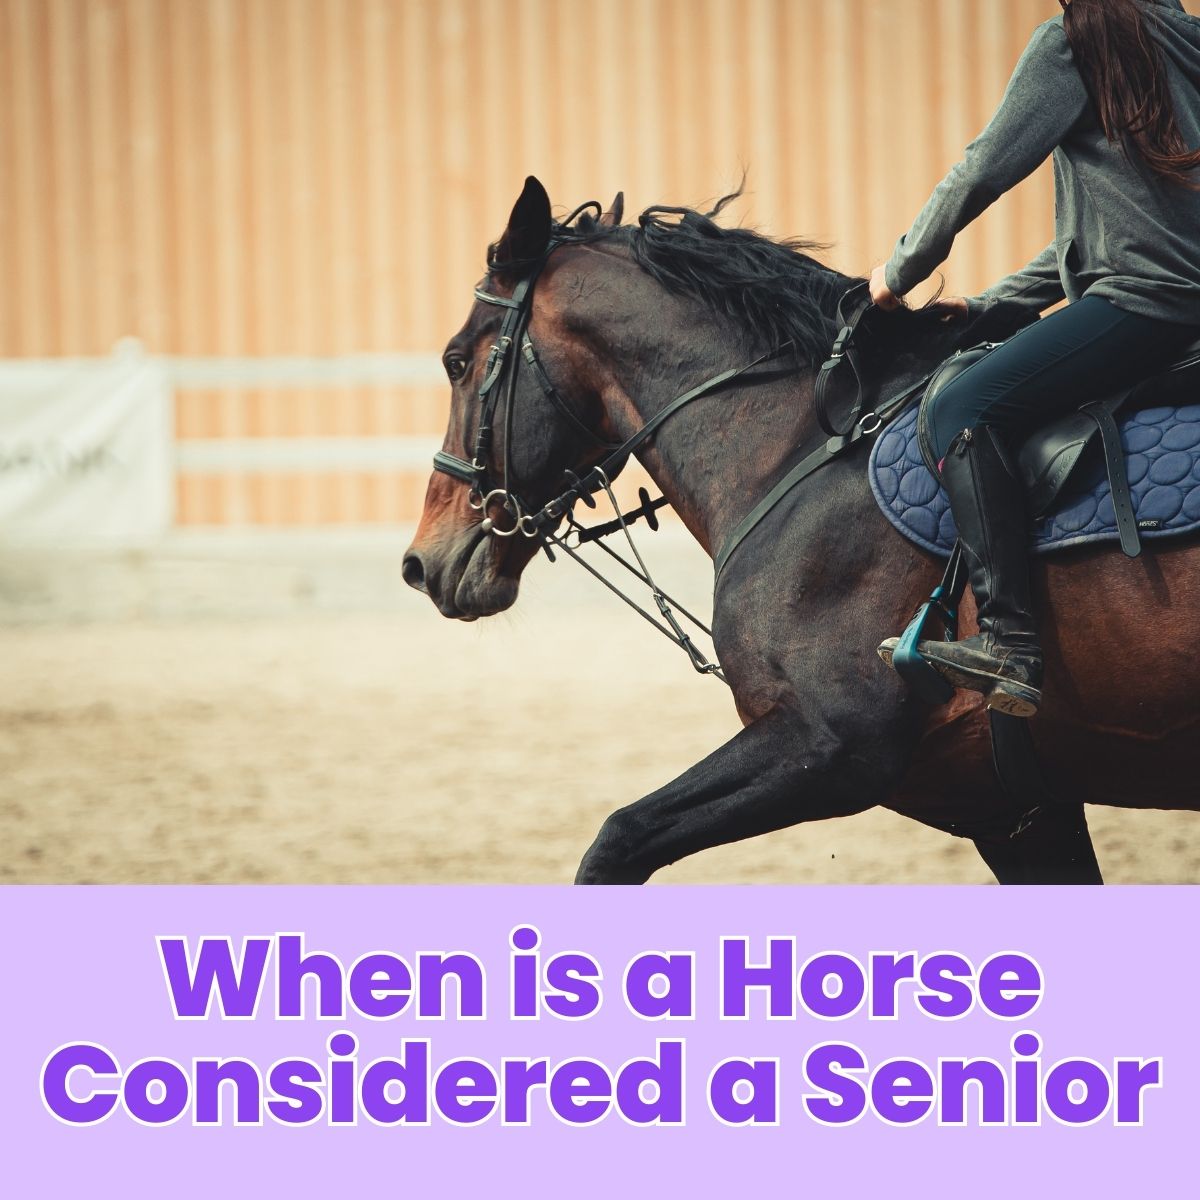 You are currently viewing When is a Horse Considered a Senior?